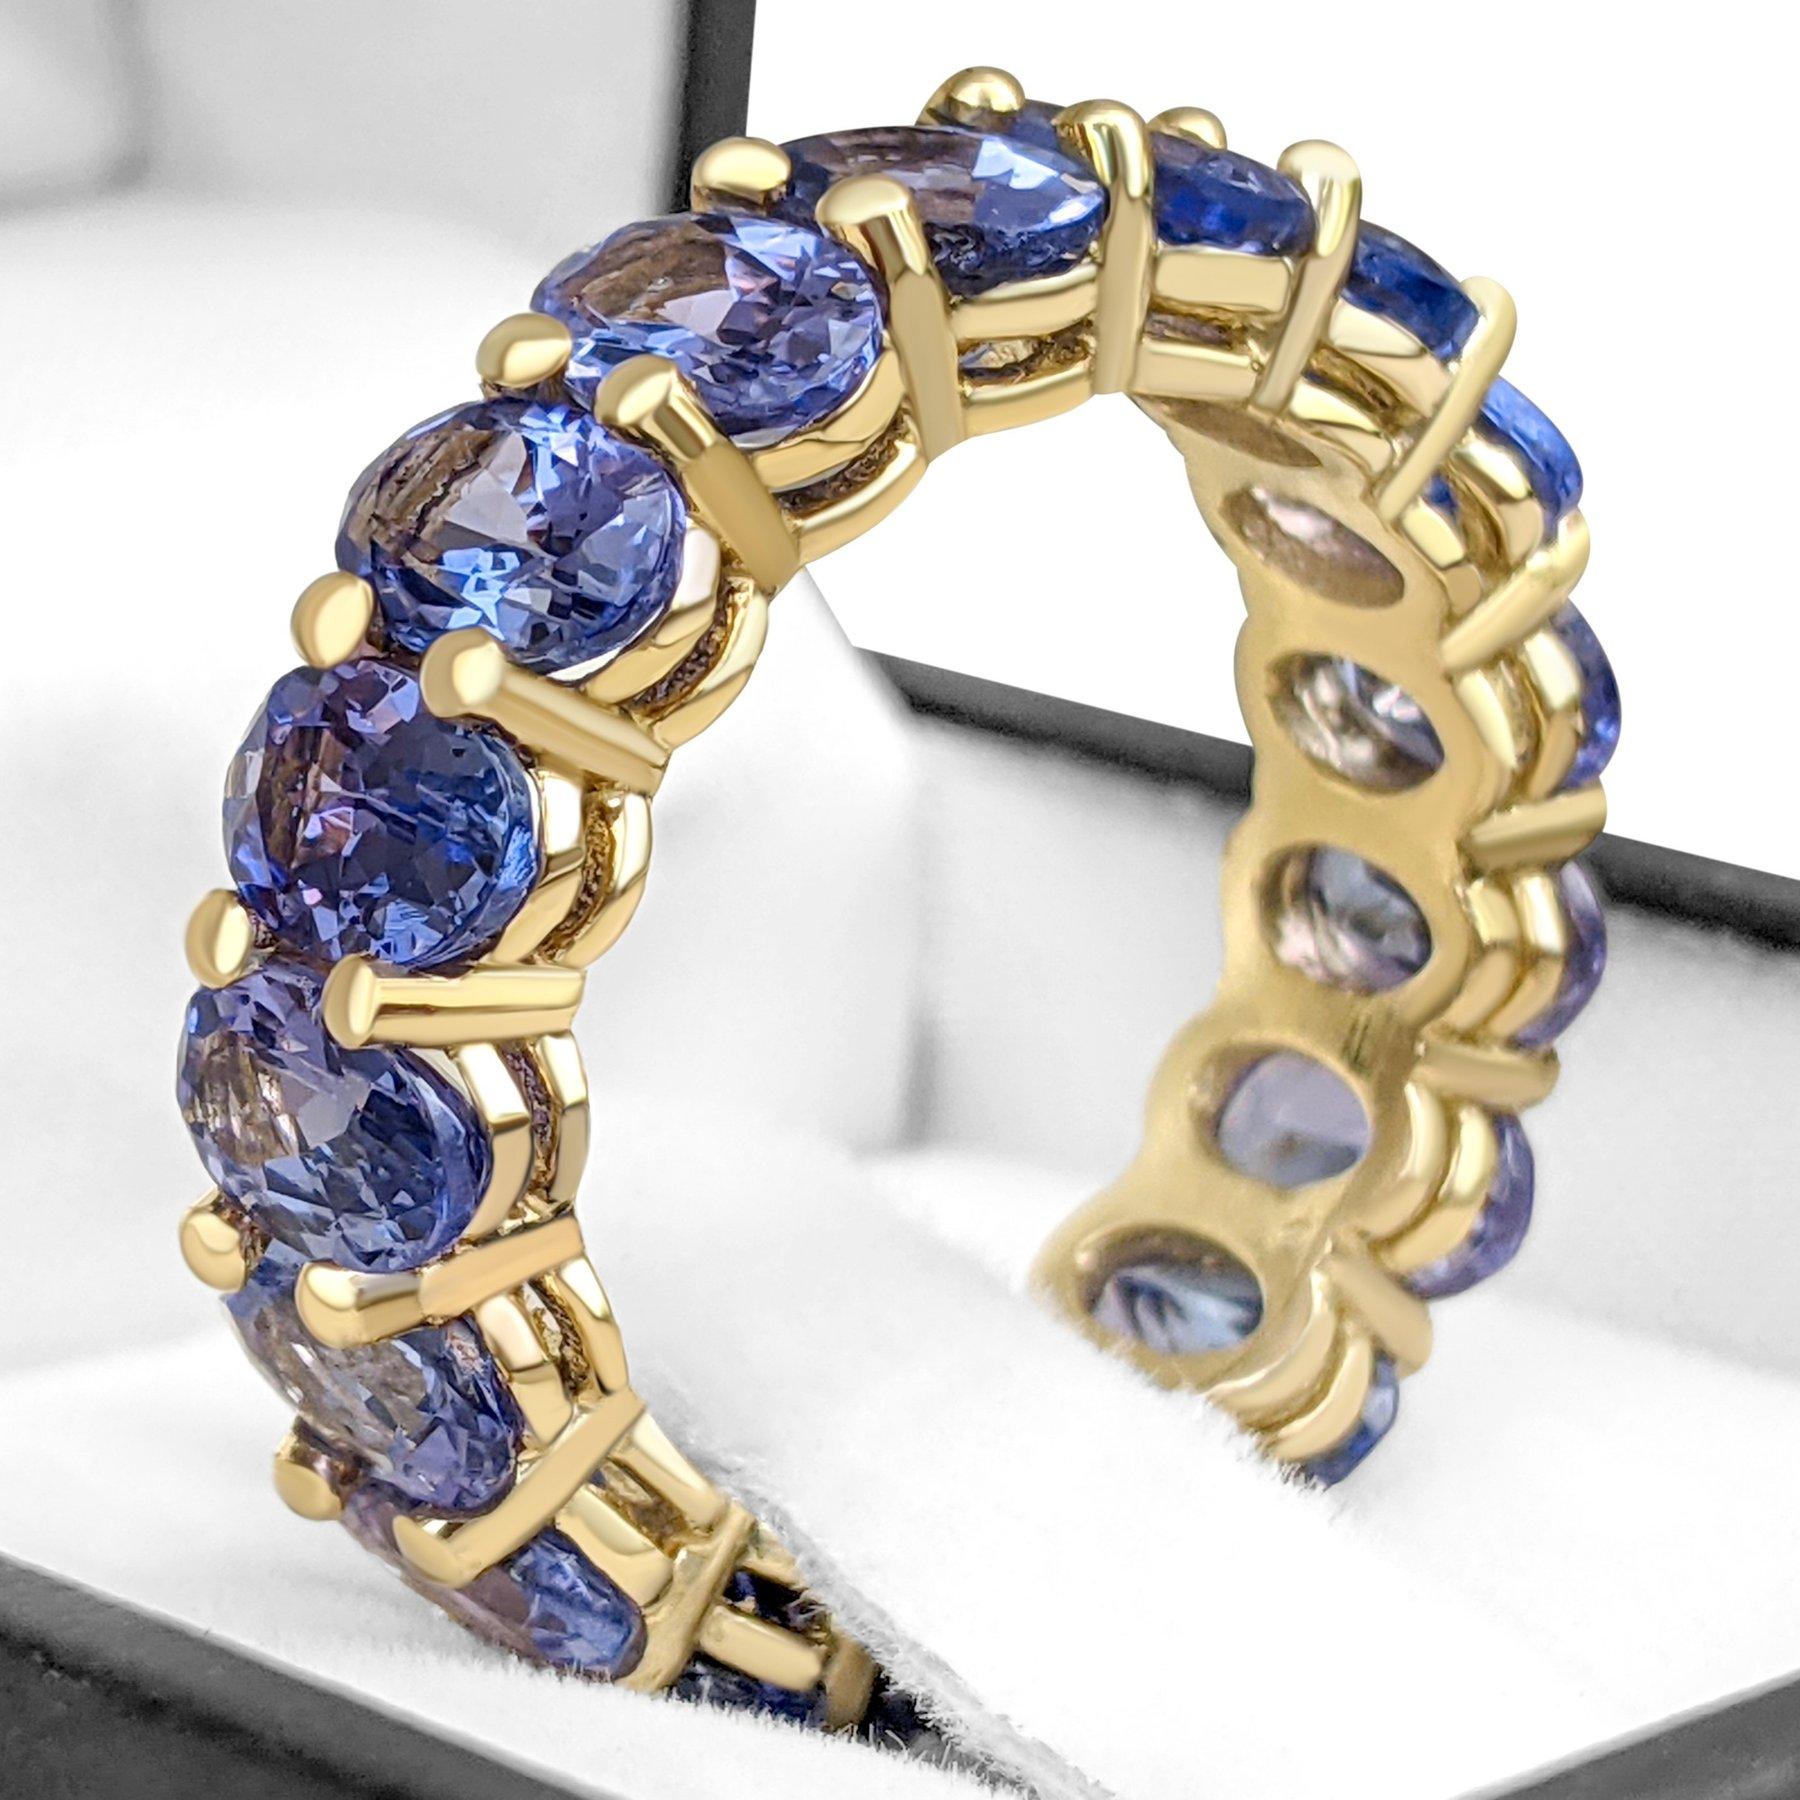 This ring is definitely a show stopper and will draw attention wherever you go! A great gift for yourself or your loved one - a heirloom piece to treasure forever!

Ring Size: 55 EU

Center Natural Tanzanites:
Weight: 7.35 ct, 17 stones
Color: